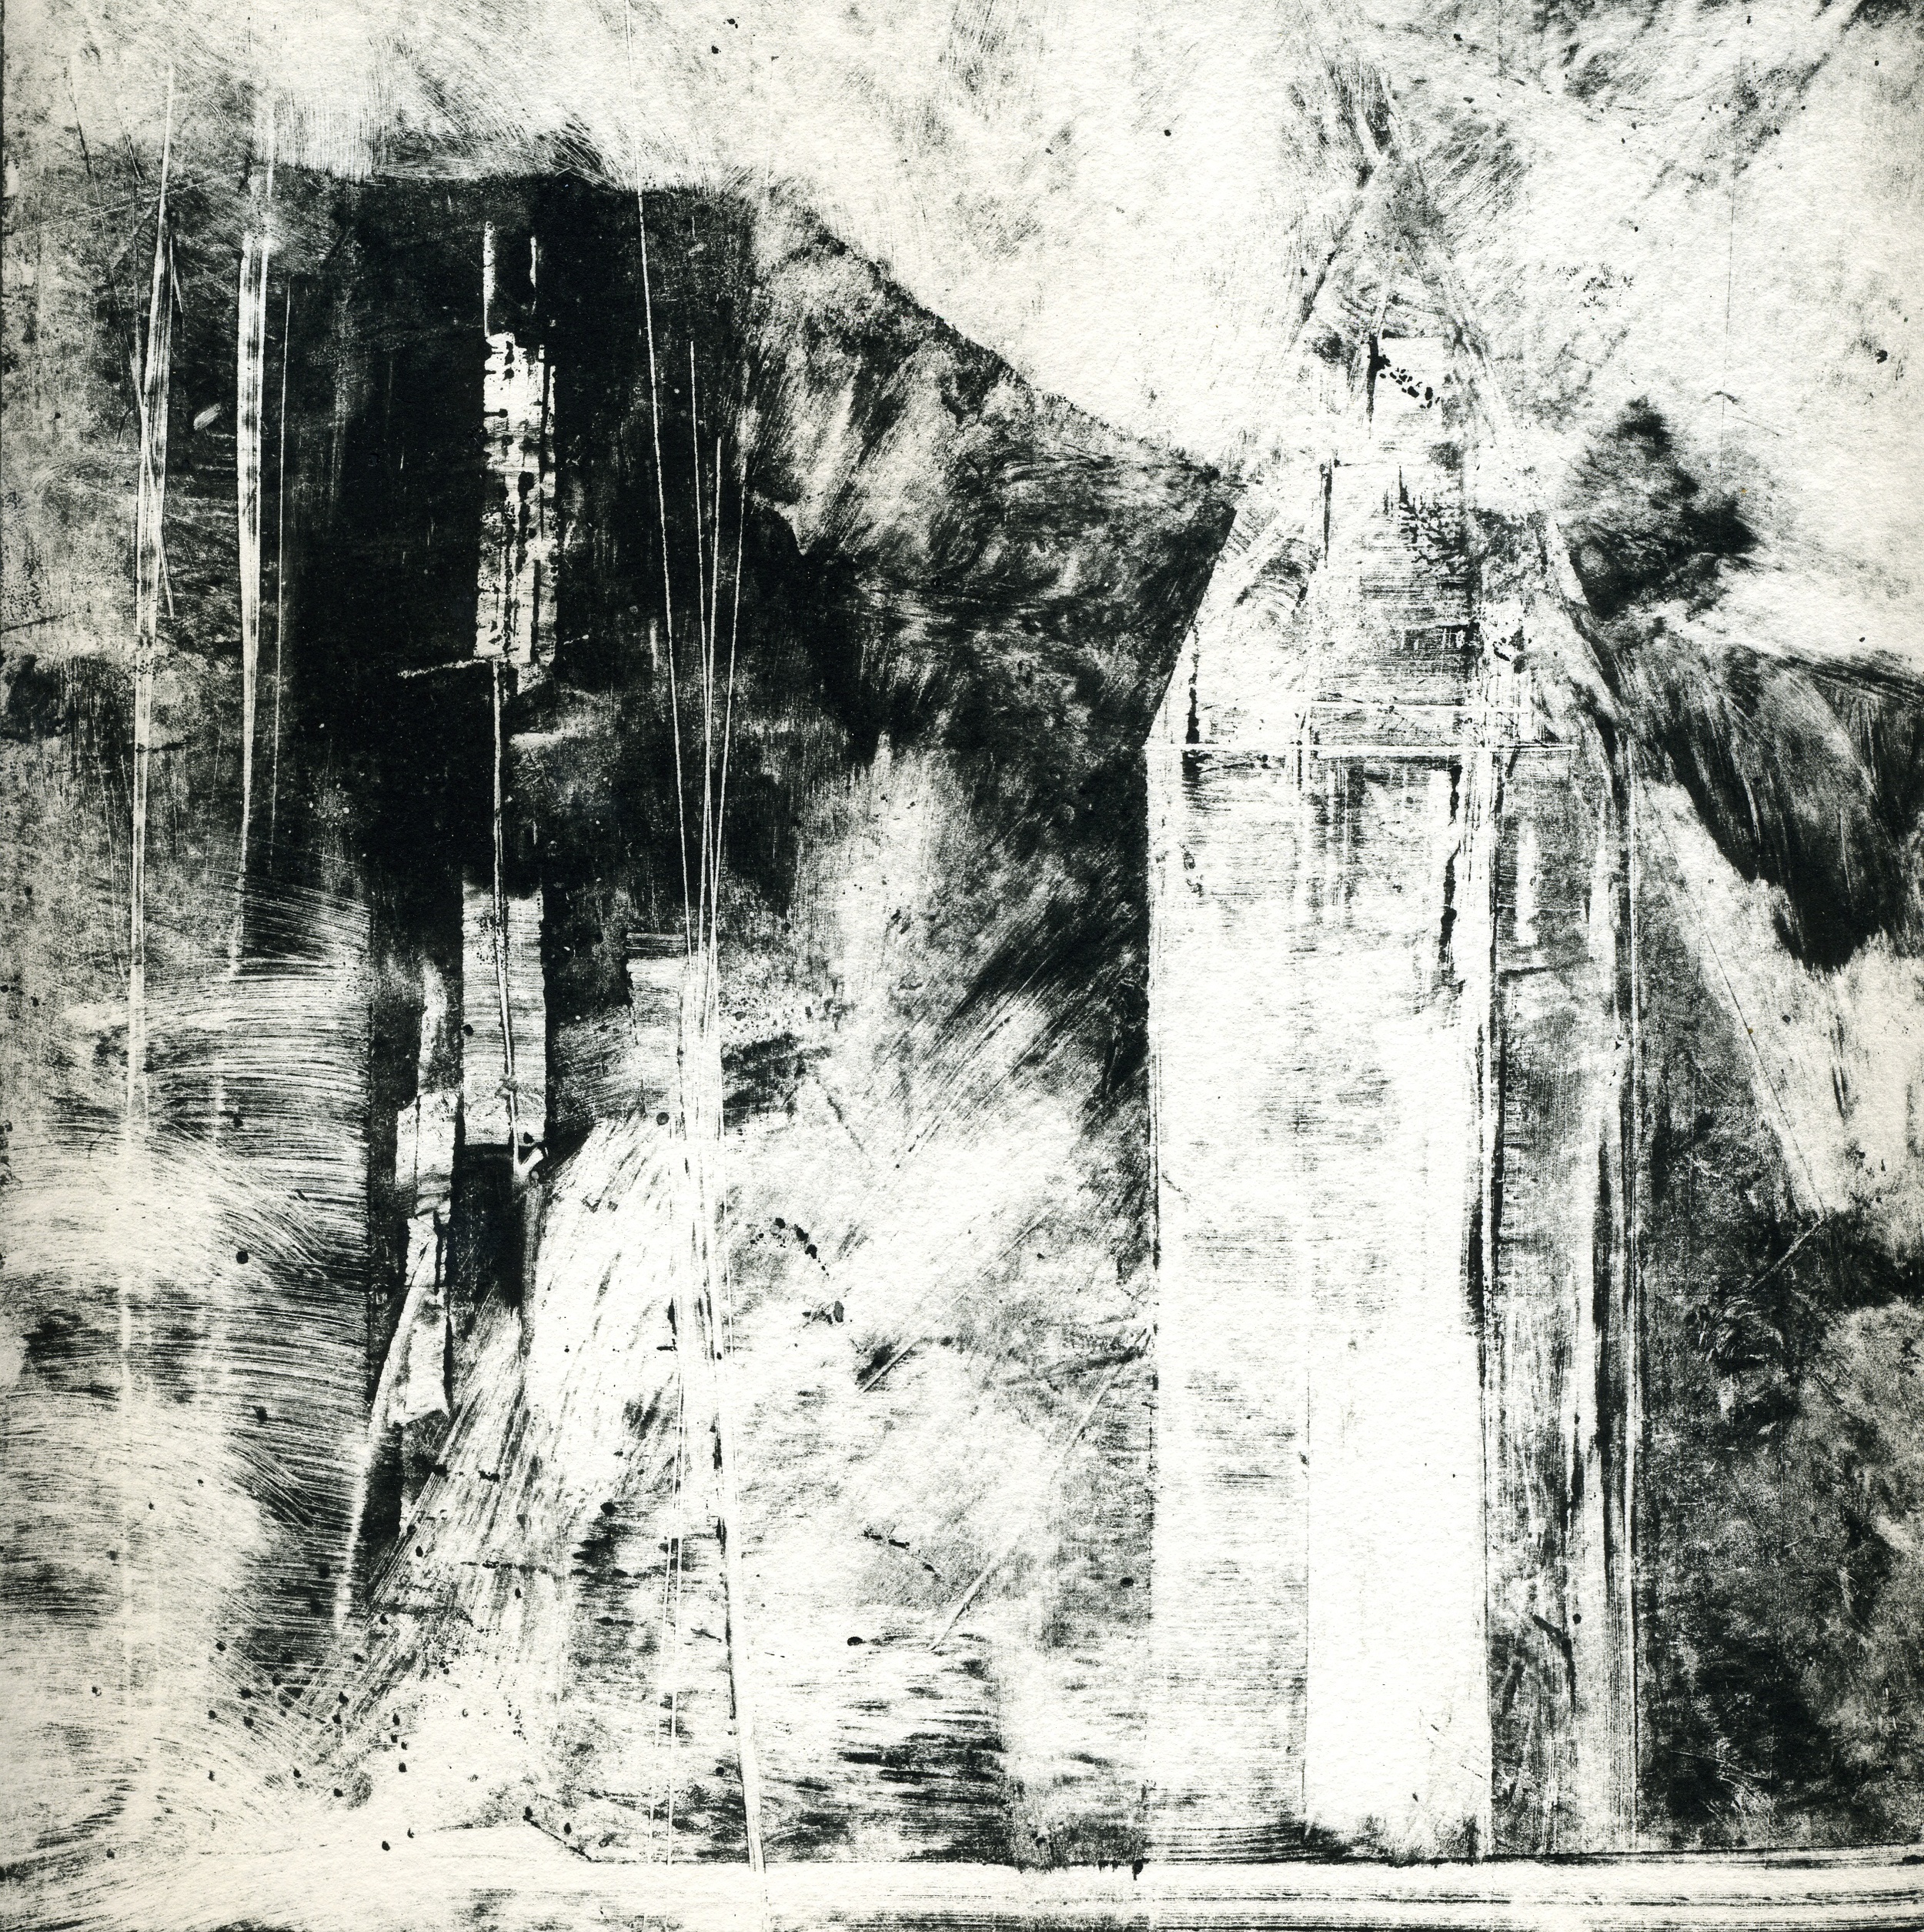  A monotype print by Clive Knights from his Lunigiana series exploring experiences from his sabbatical in the Lunigiana&nbsp; 